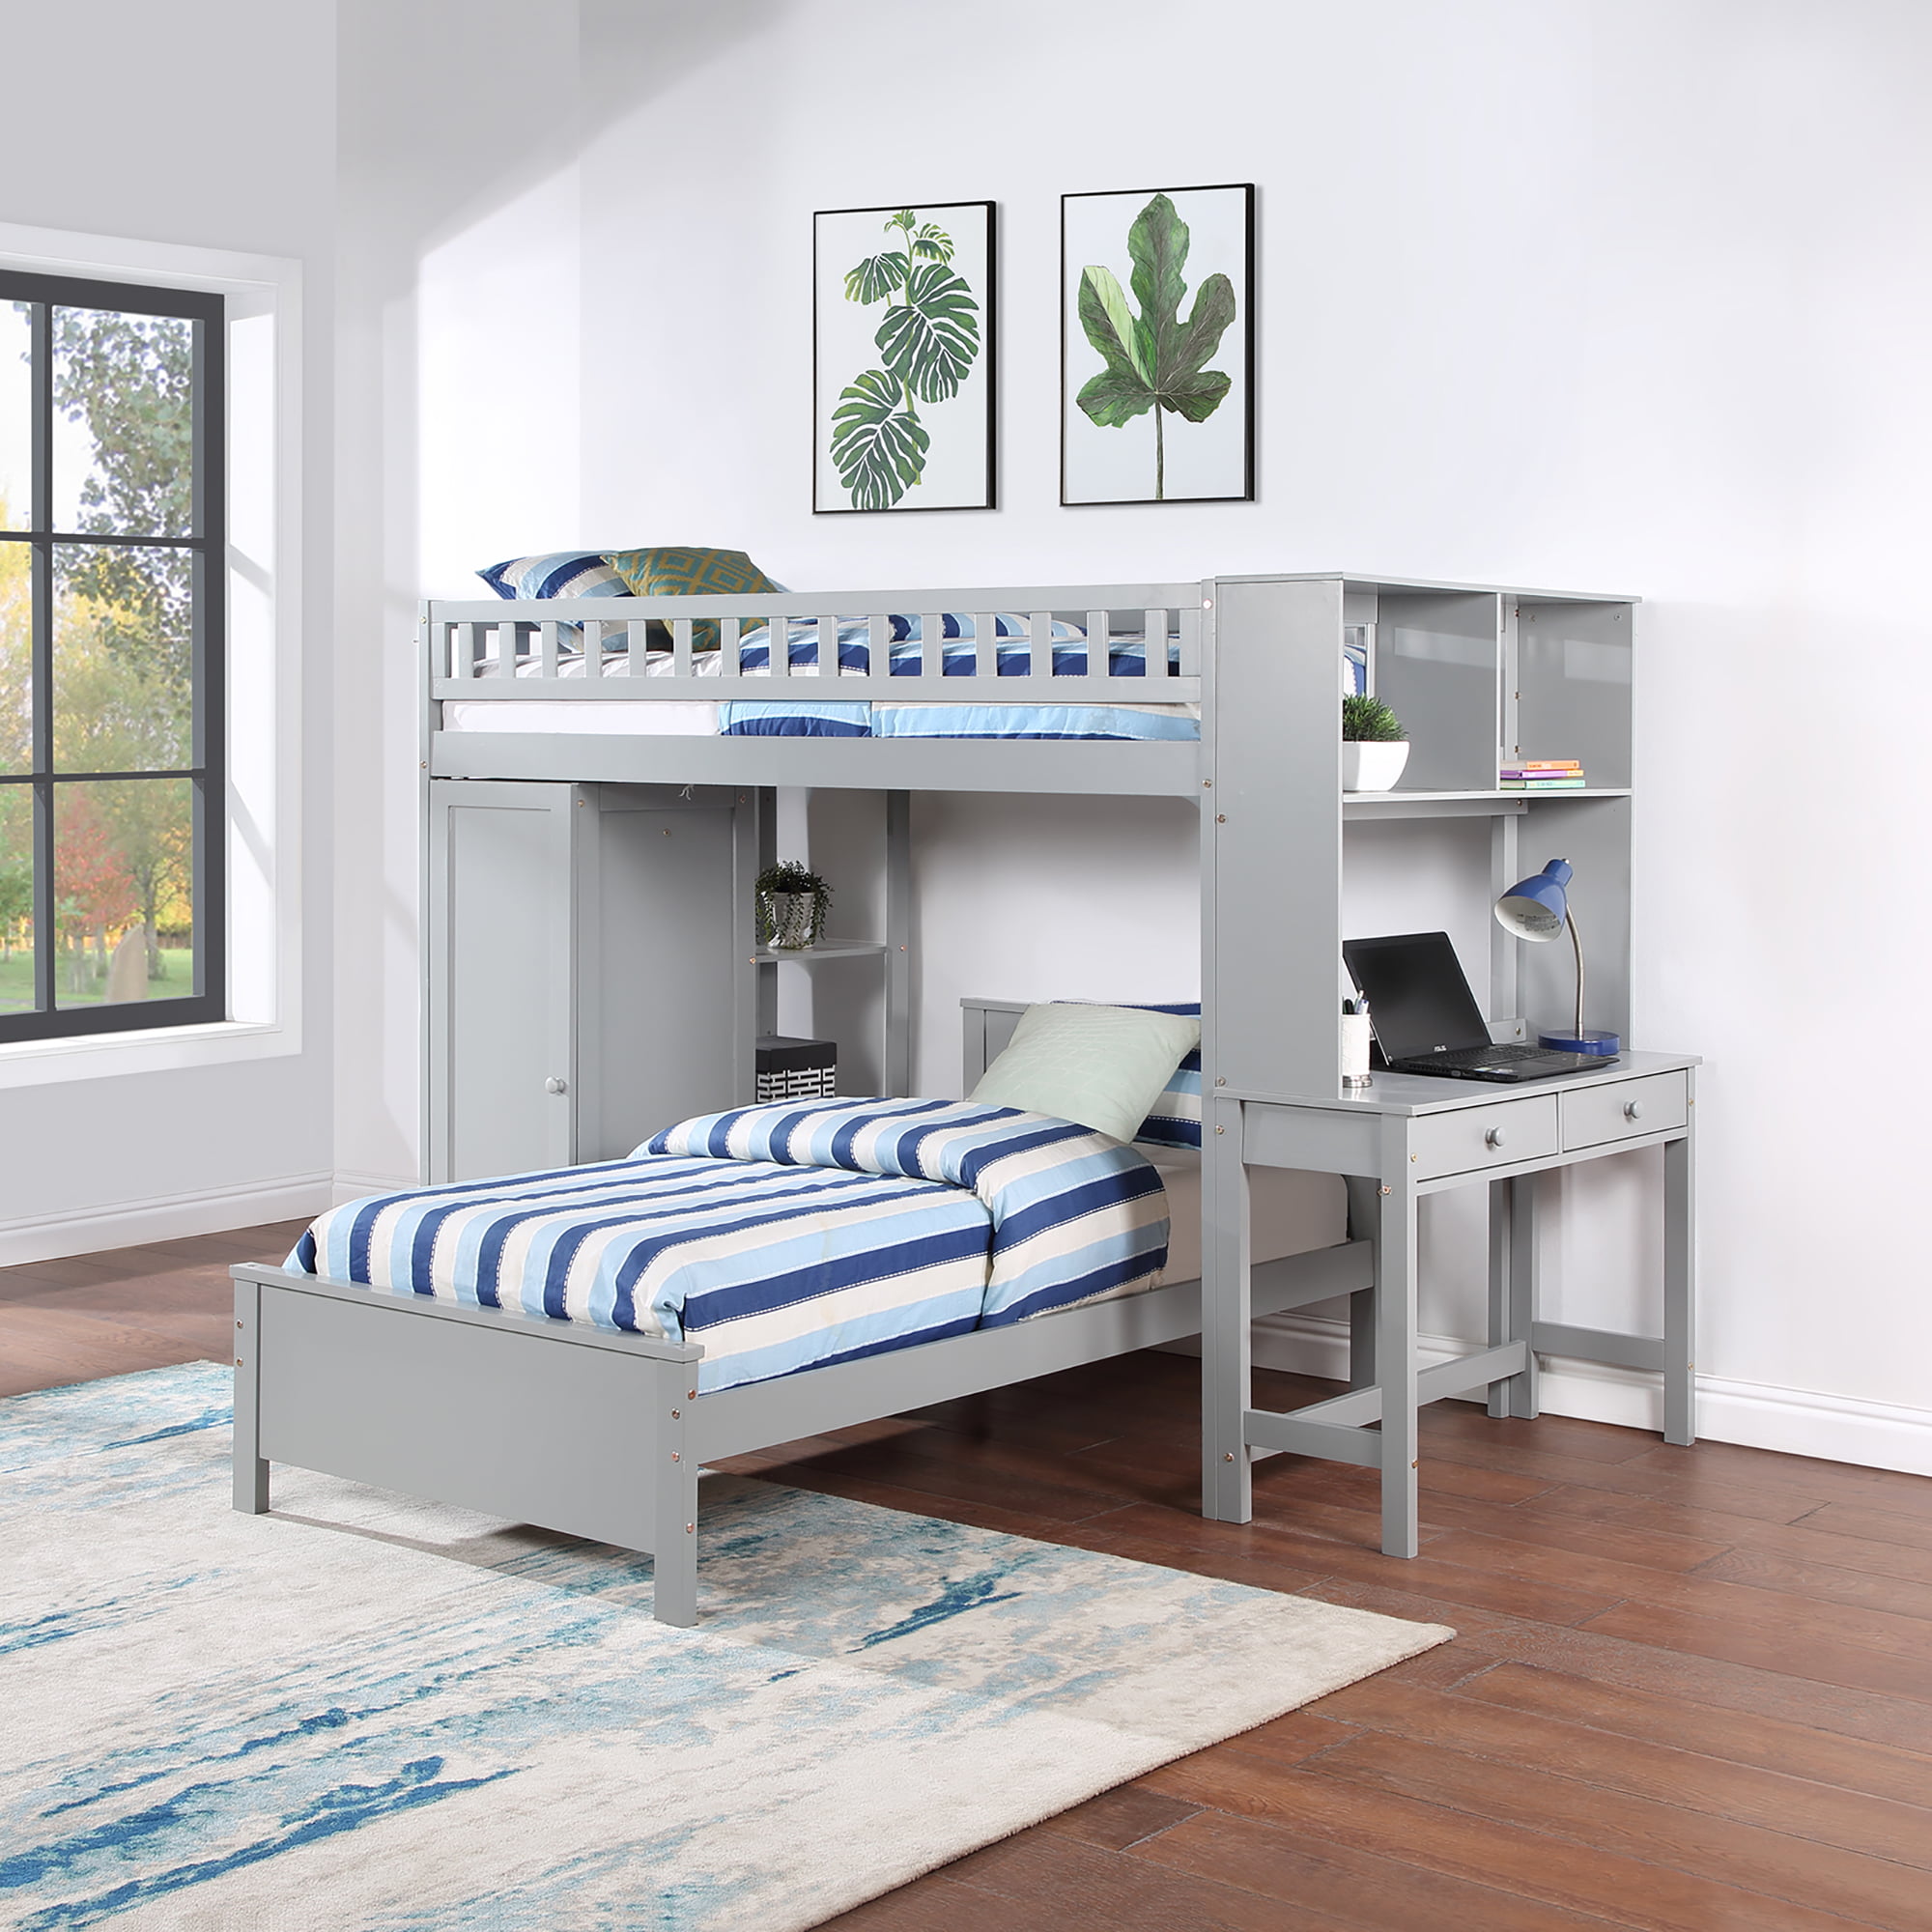 Twin Size Loft Bed With Closet And Desk - W487S00095